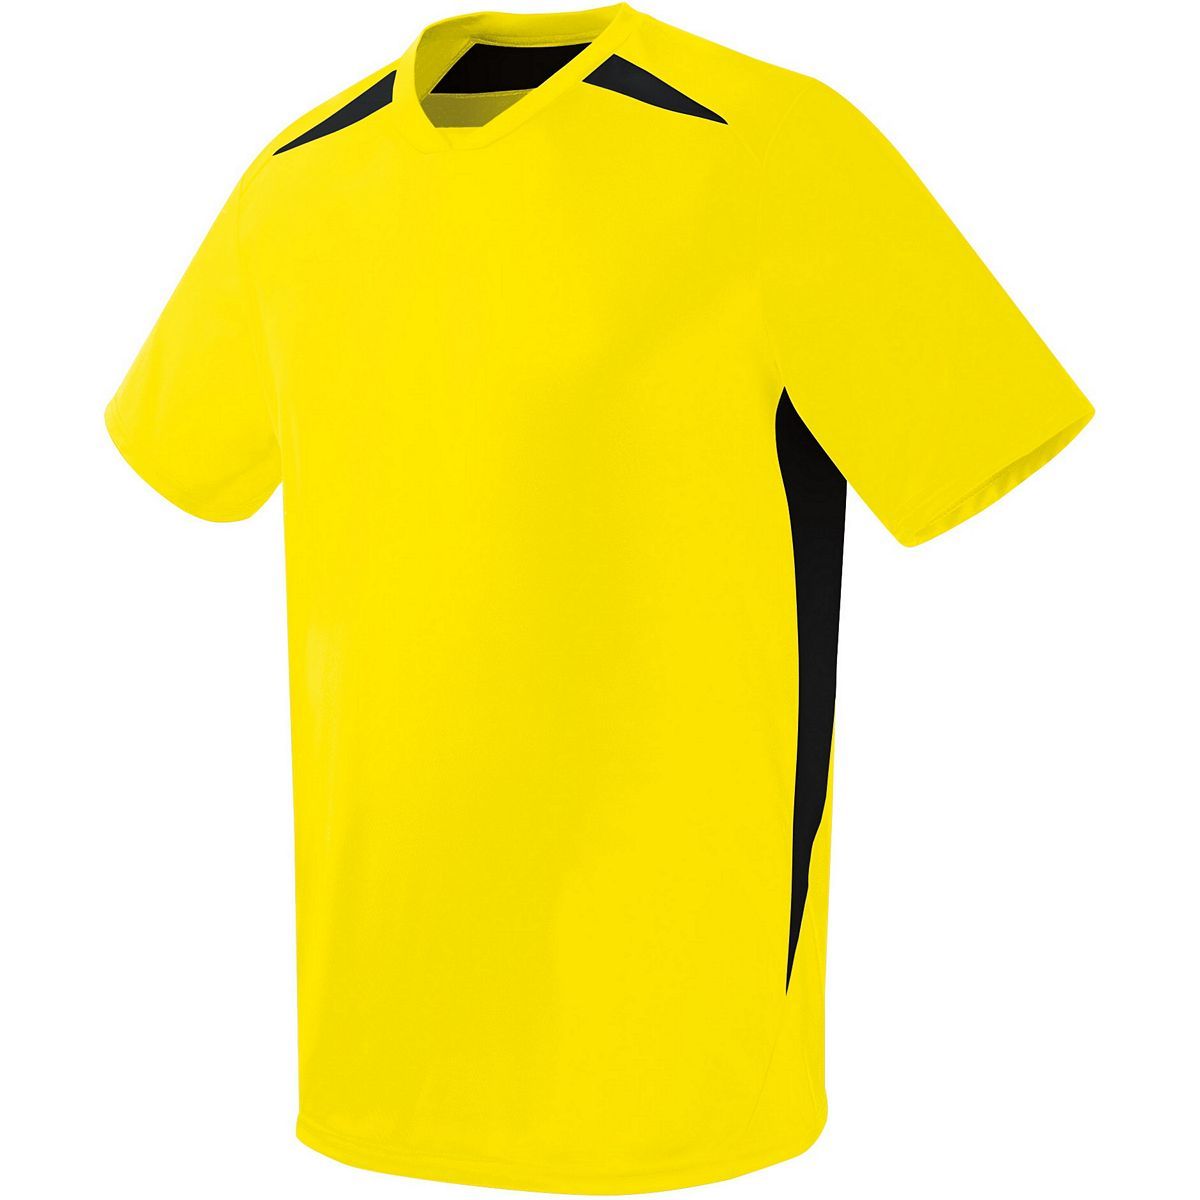 High 5 Adult Hawk Jersey in Power Yellow/Black  -Part of the Adult, Adult-Jersey, High5-Products, Soccer, Shirts, All-Sports-1 product lines at KanaleyCreations.com